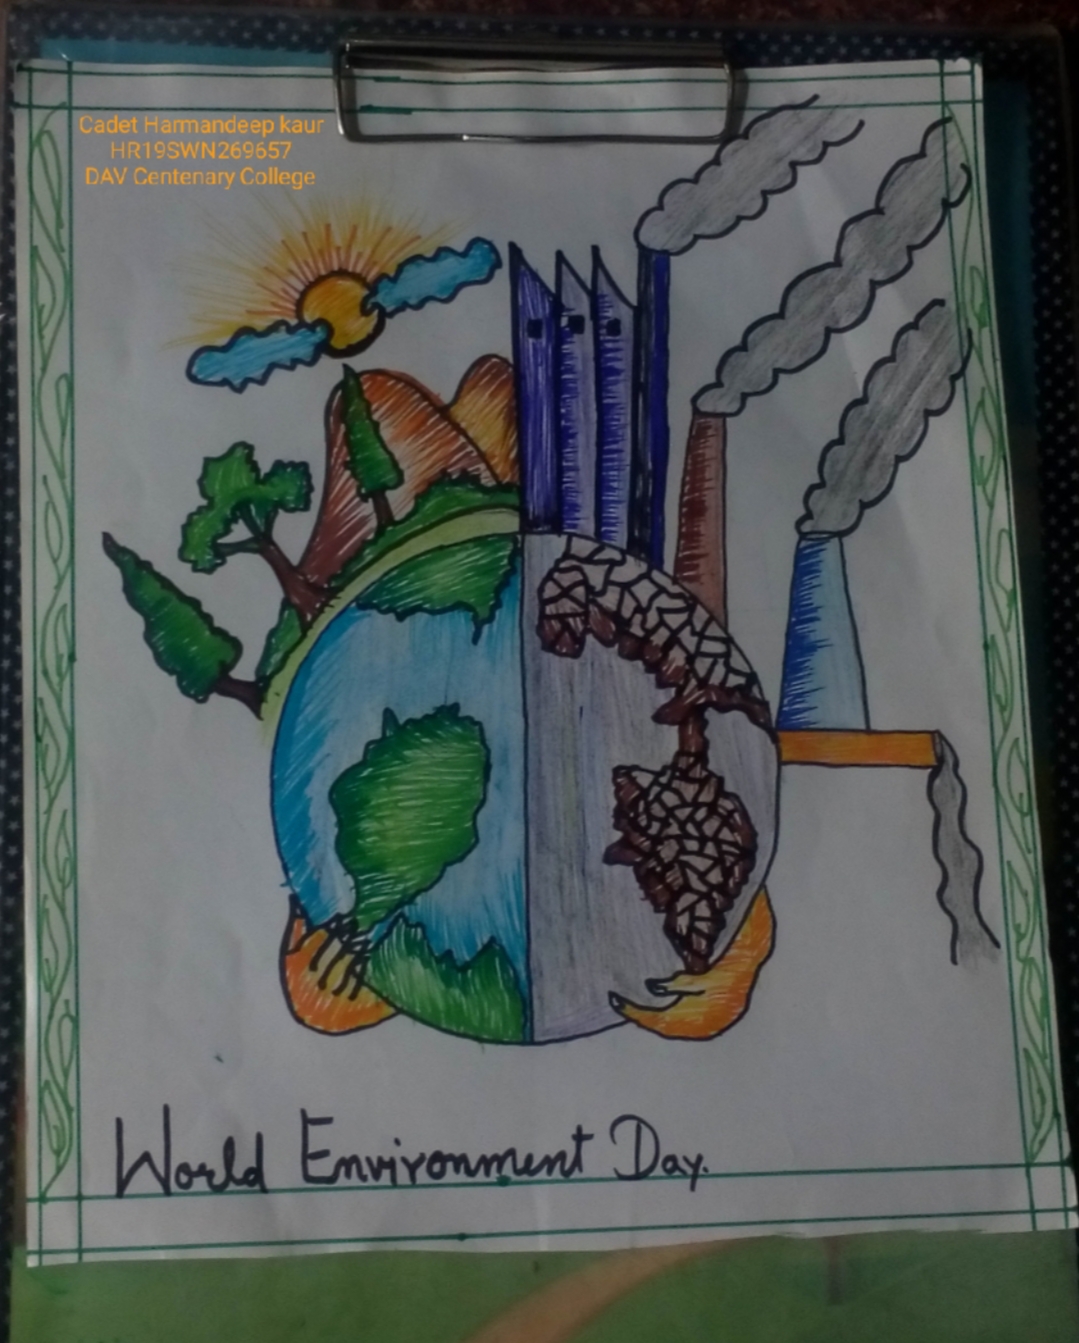 Pin by Amyvashi on Save environment posters | Save water poster drawing,  Earth drawings, Art poster design